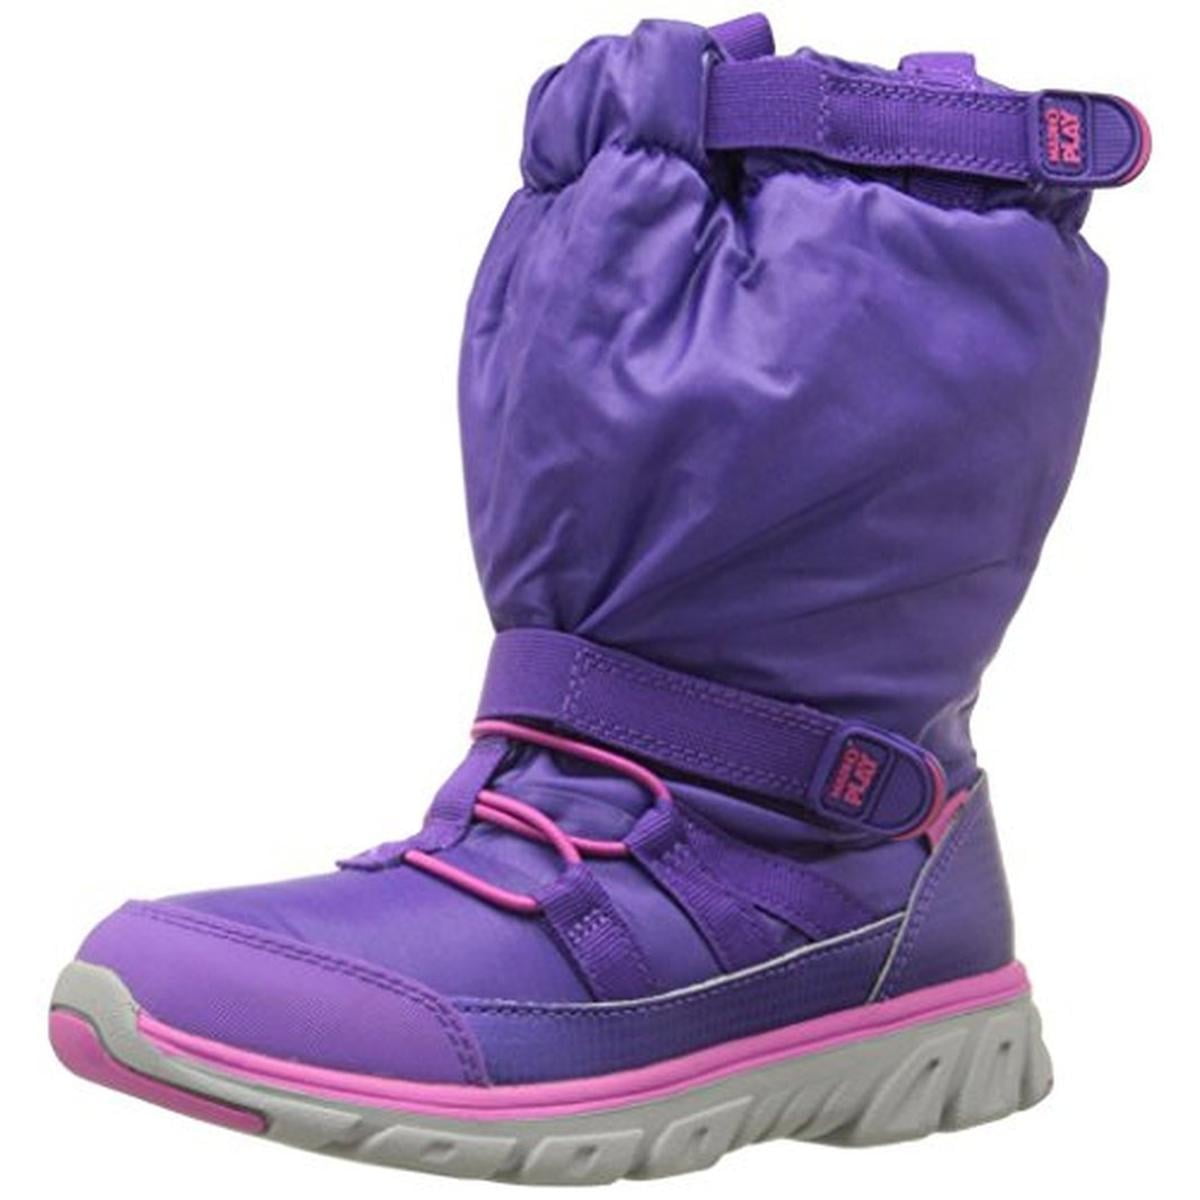 Girls Made 2 Play Sneaker Boot Infant 